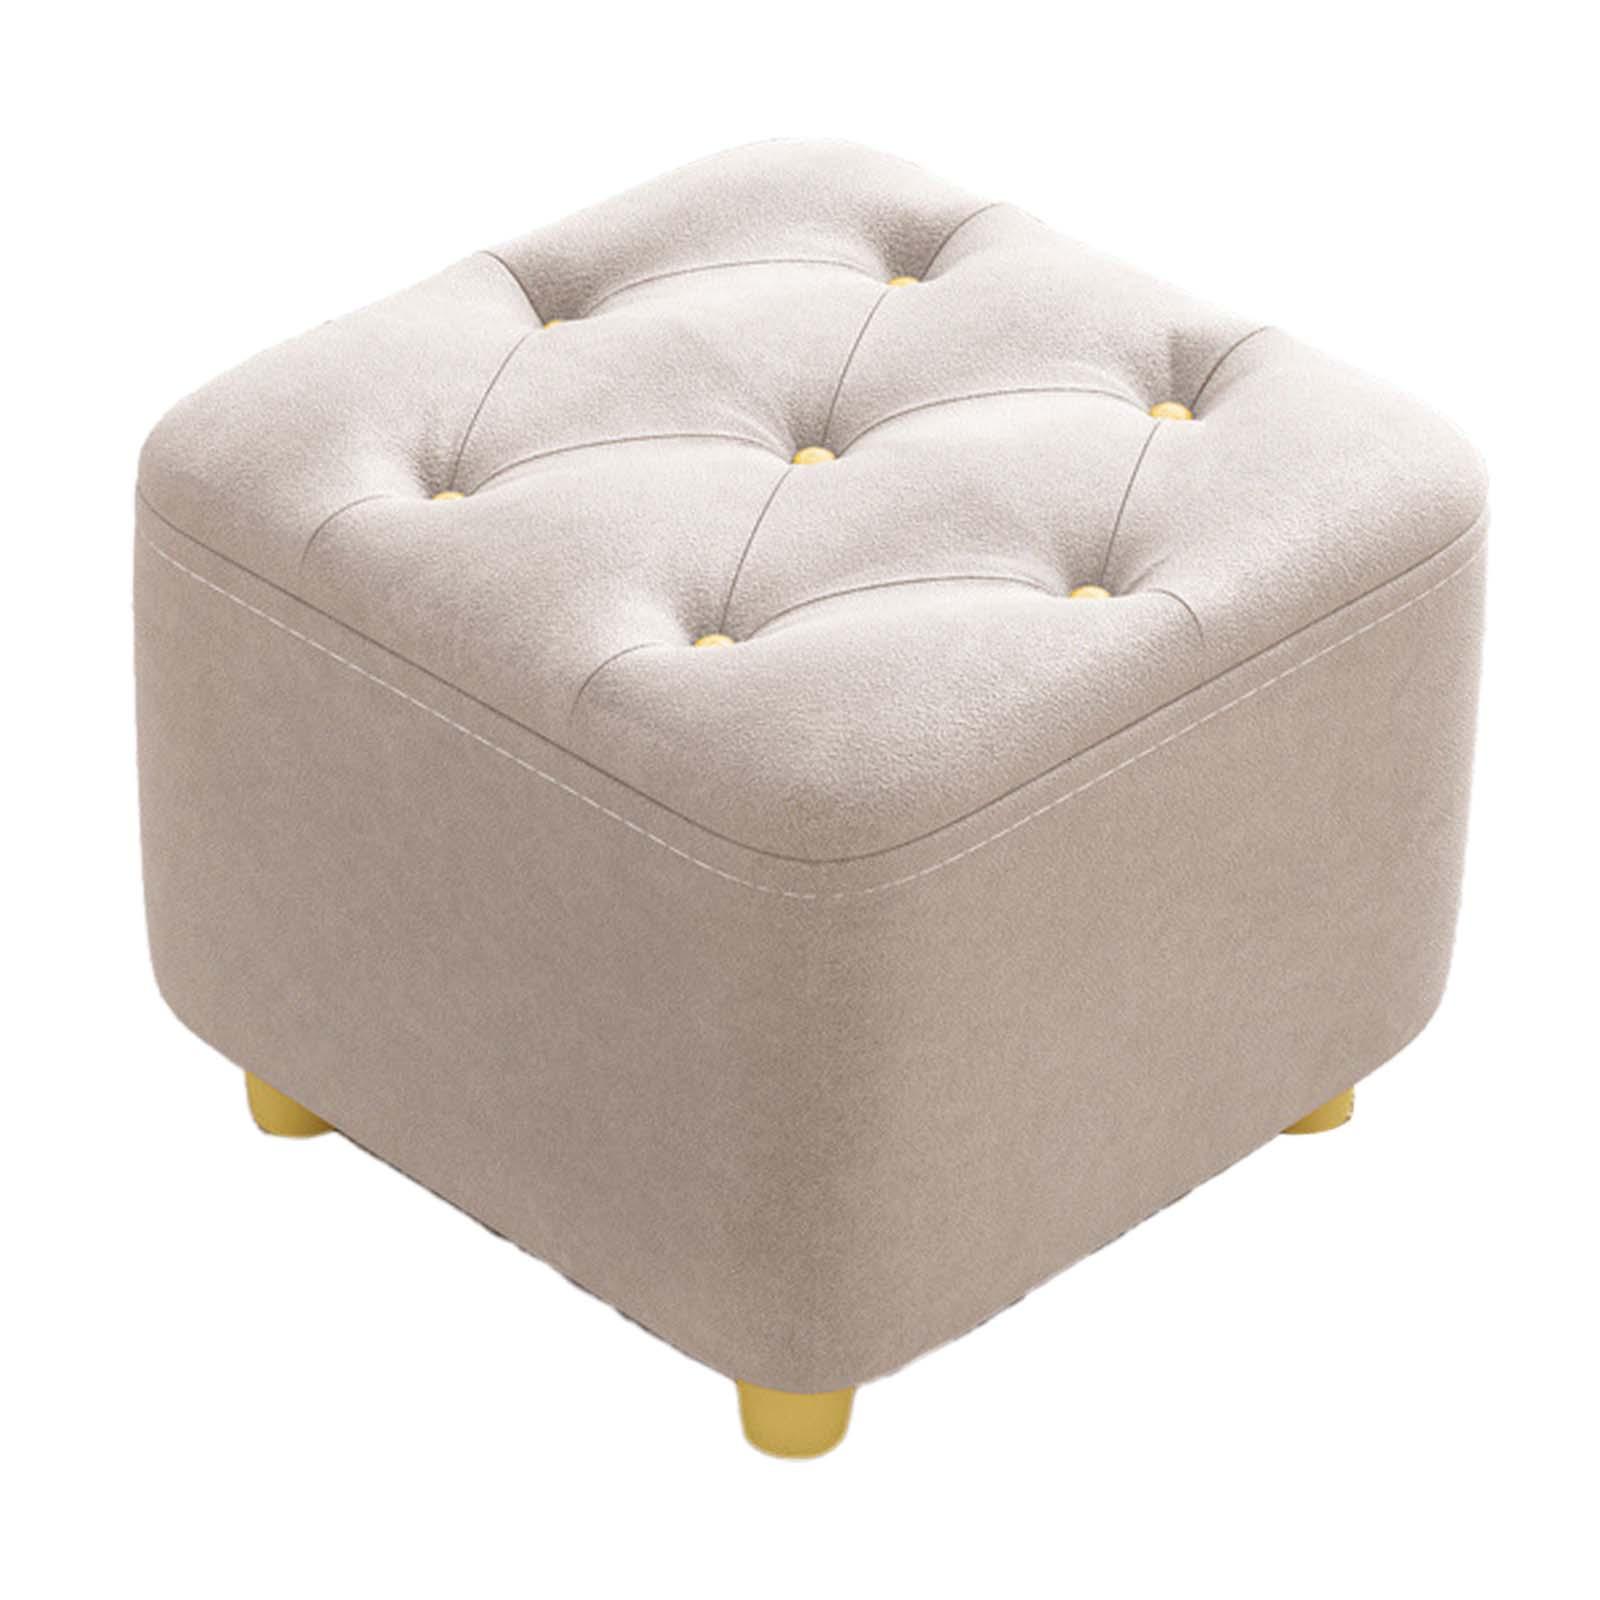 Square Footstool Foot Stool Comfortable Stepstool Creative Ottoman Stool Footrest for Living Room Dressing Room Bedroom Couch beige - image 2 of 8